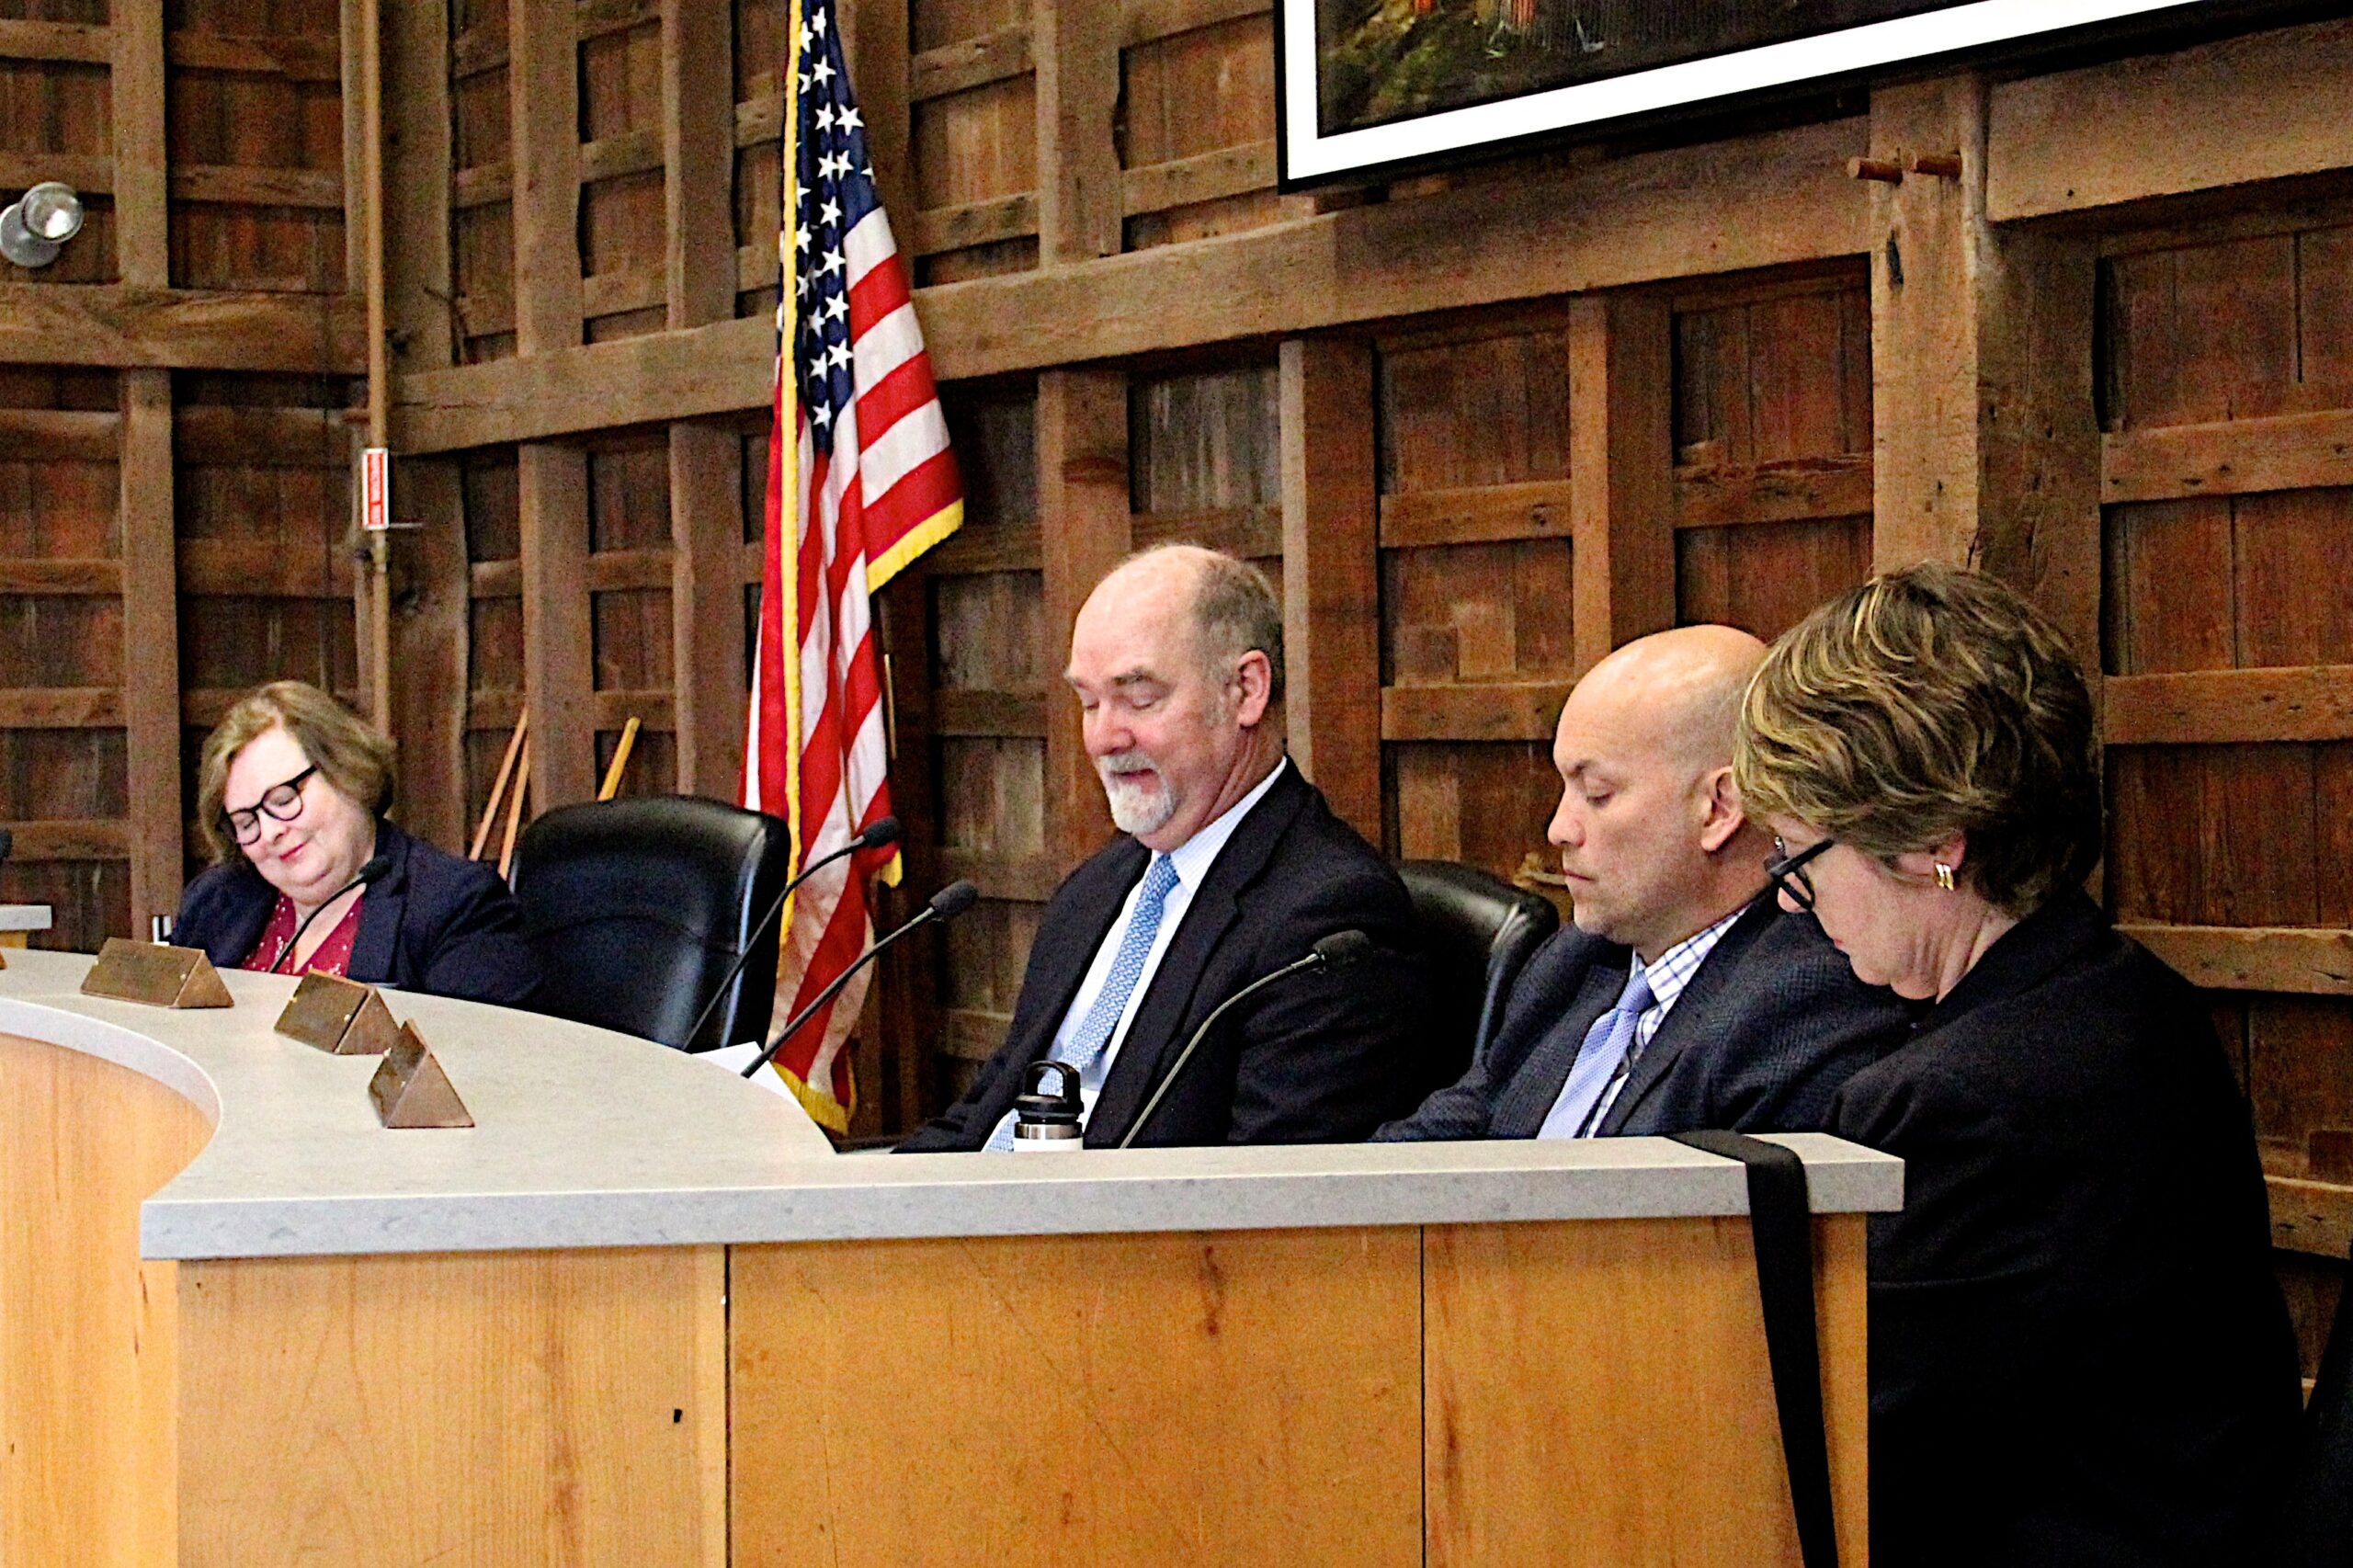 The East Hampton Town Board will introduce an affordable housing fund this spring and put it up for referendum in the fall.